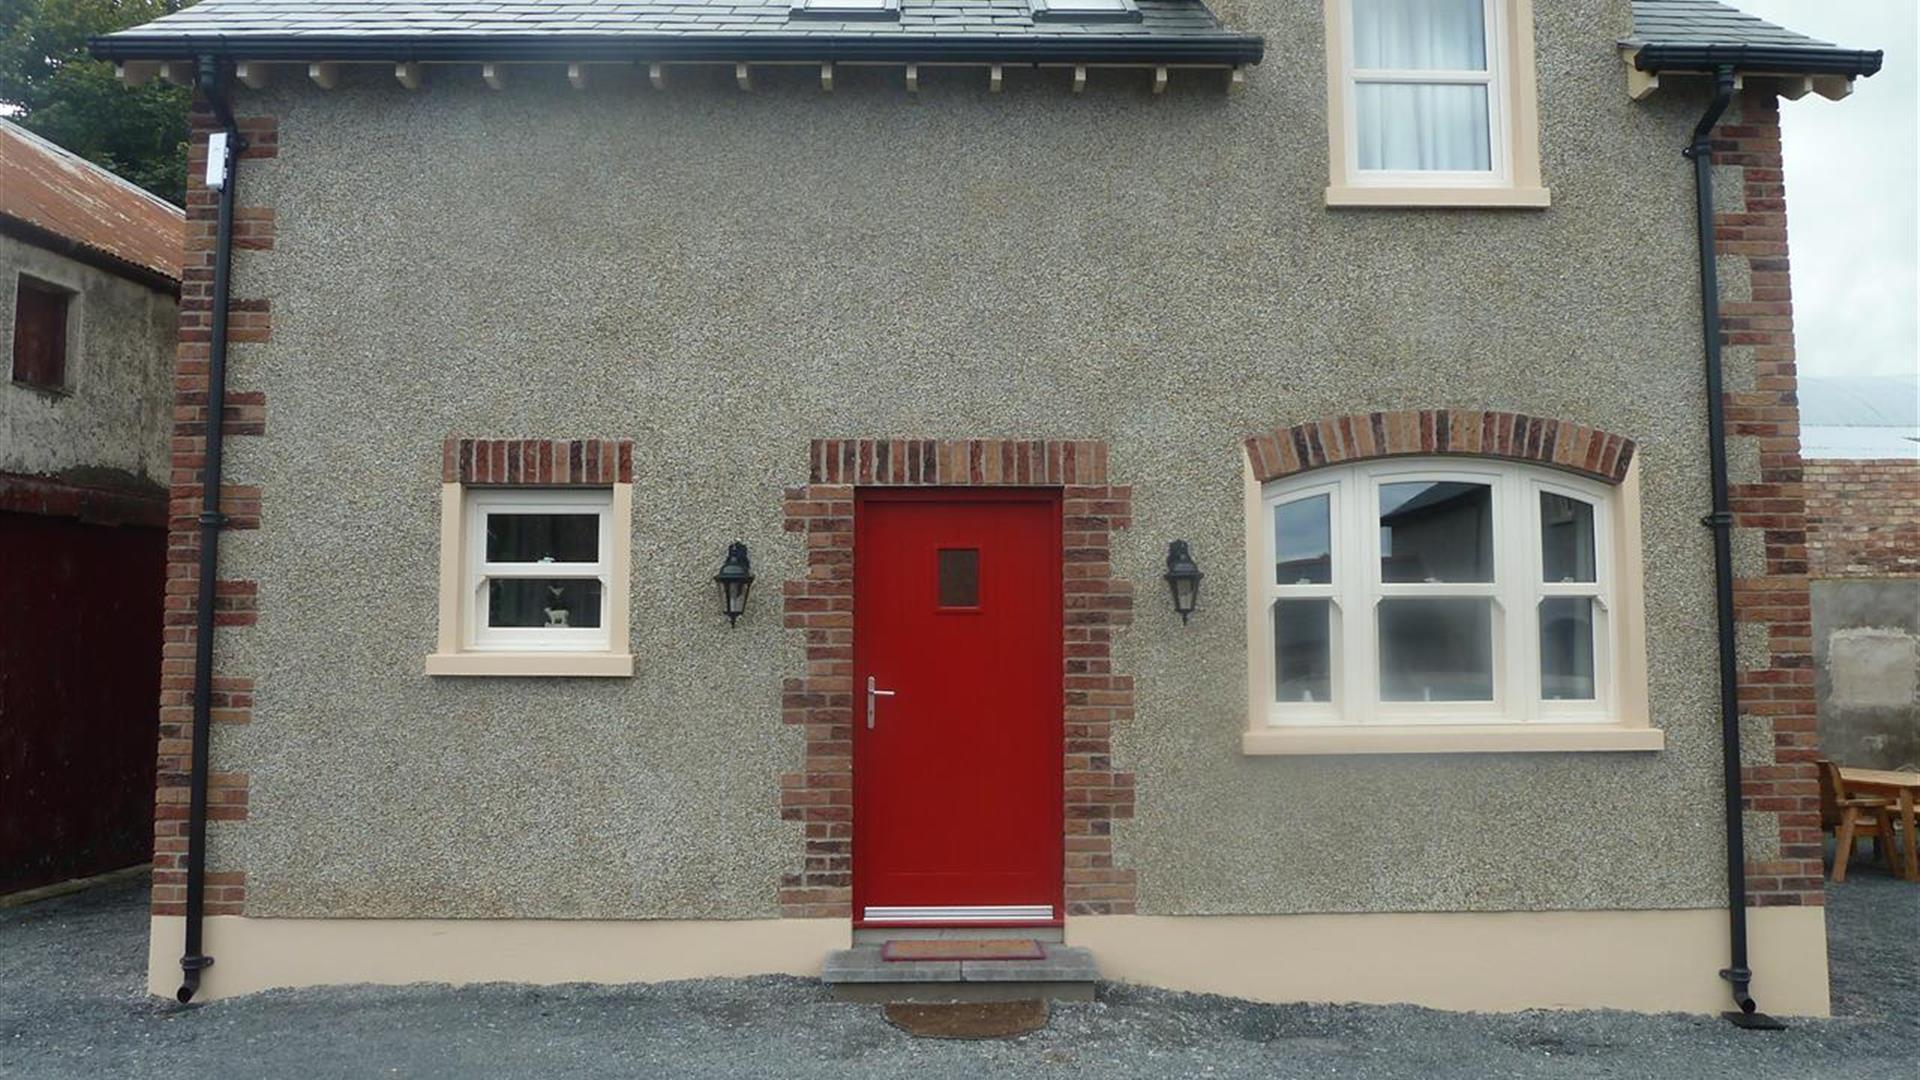 Image shows red front door of stone property with gravel drive